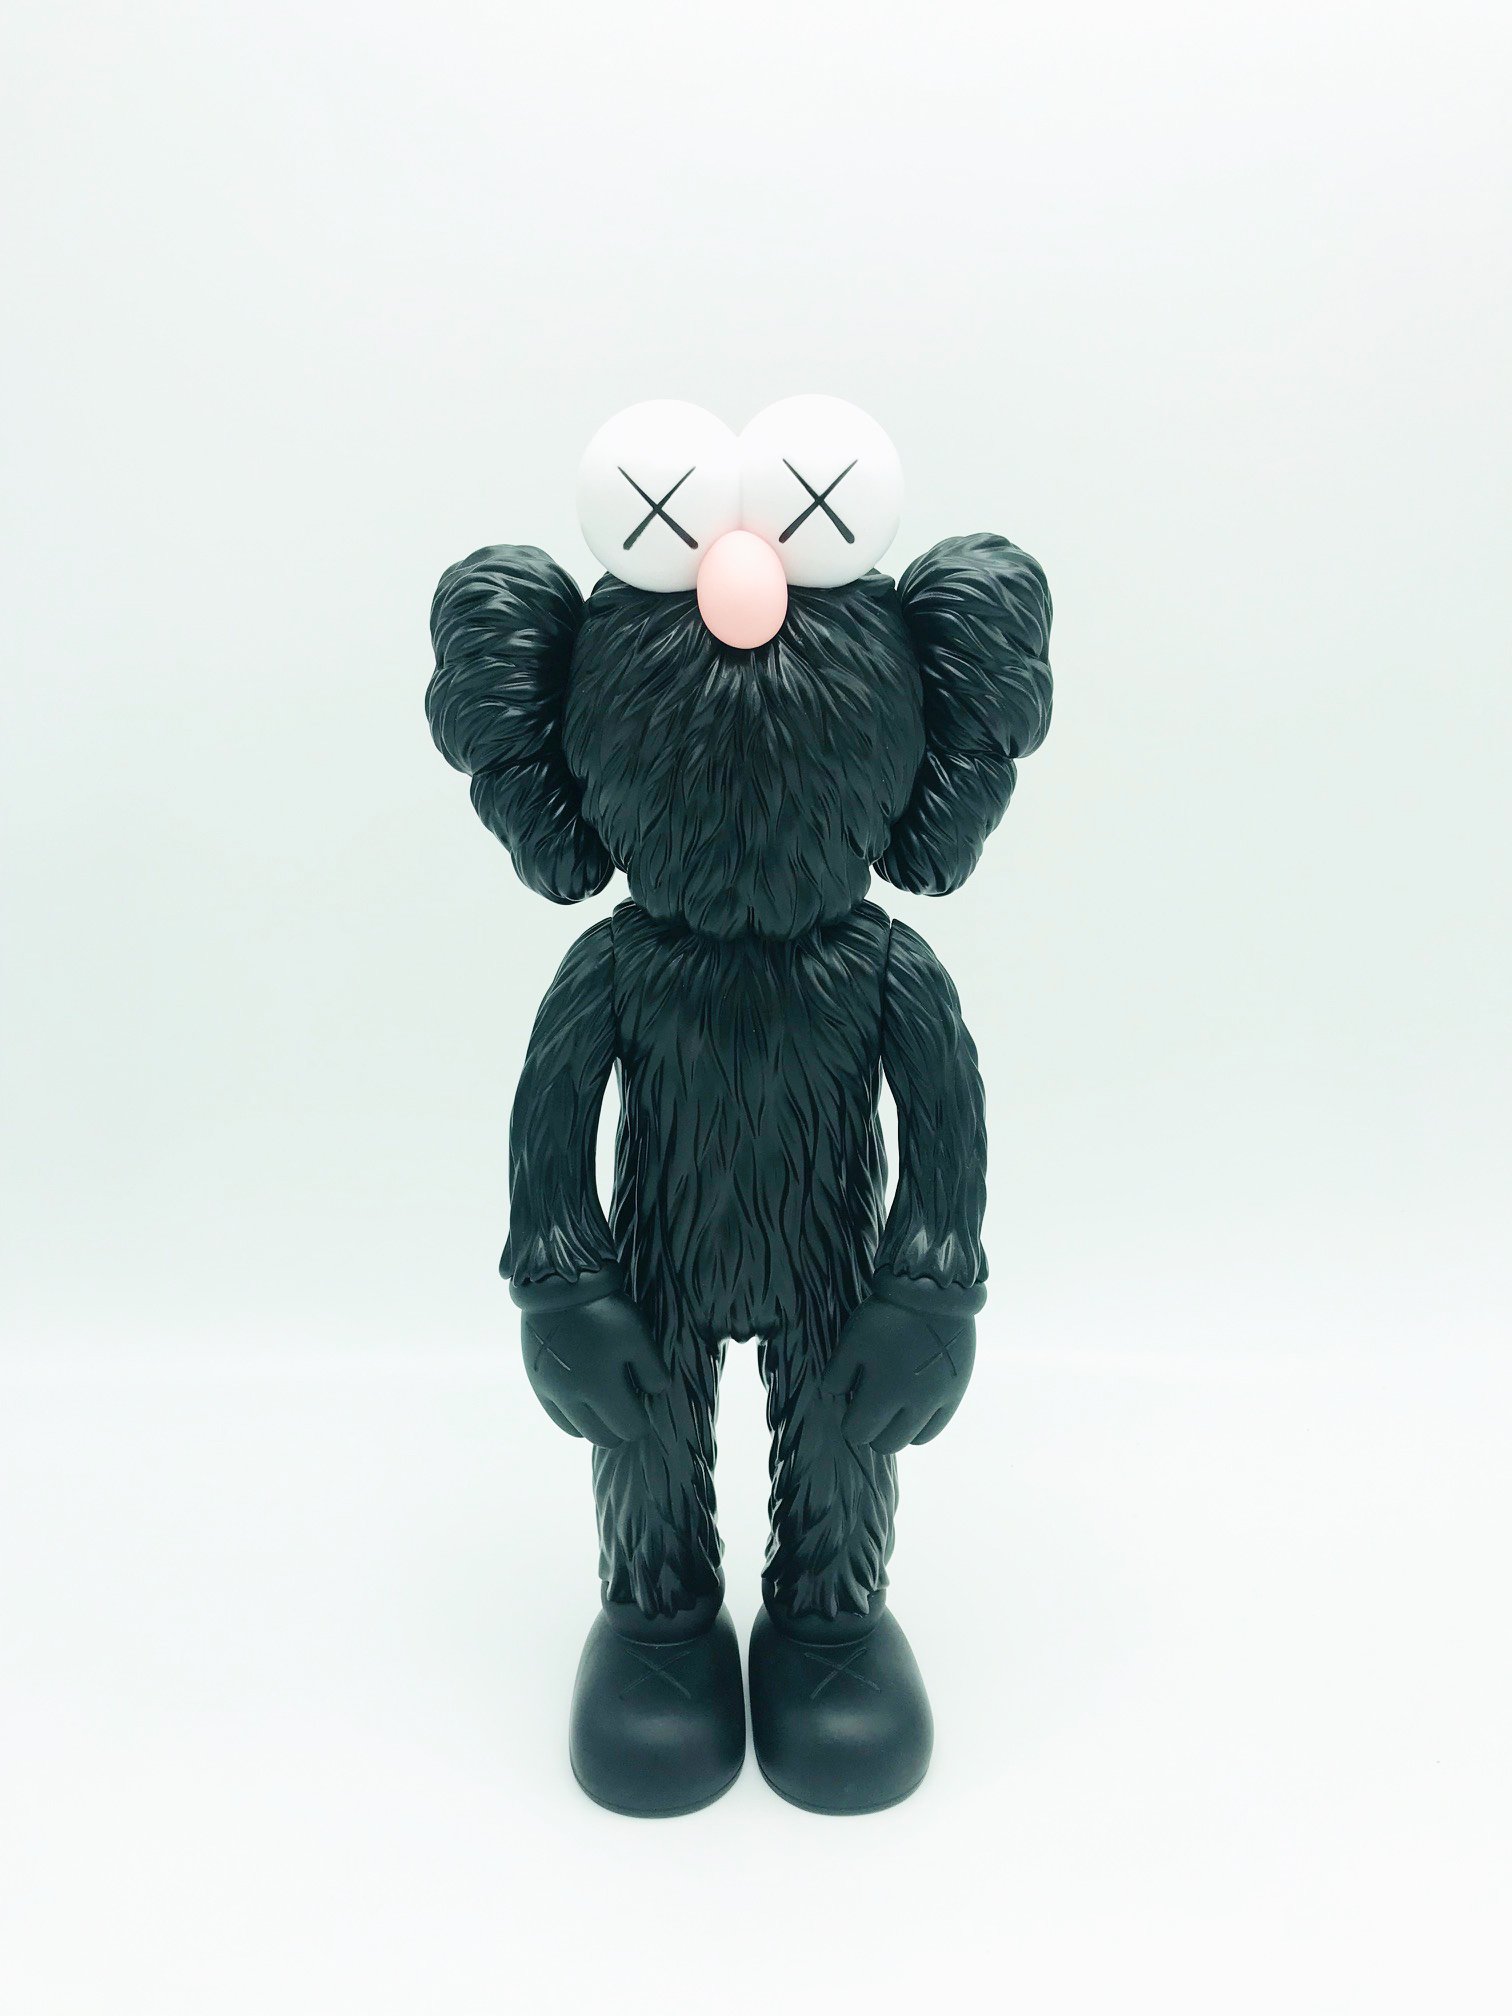 Take (Pink) by Kaws from Lougher Contemporary - Global Art Traders